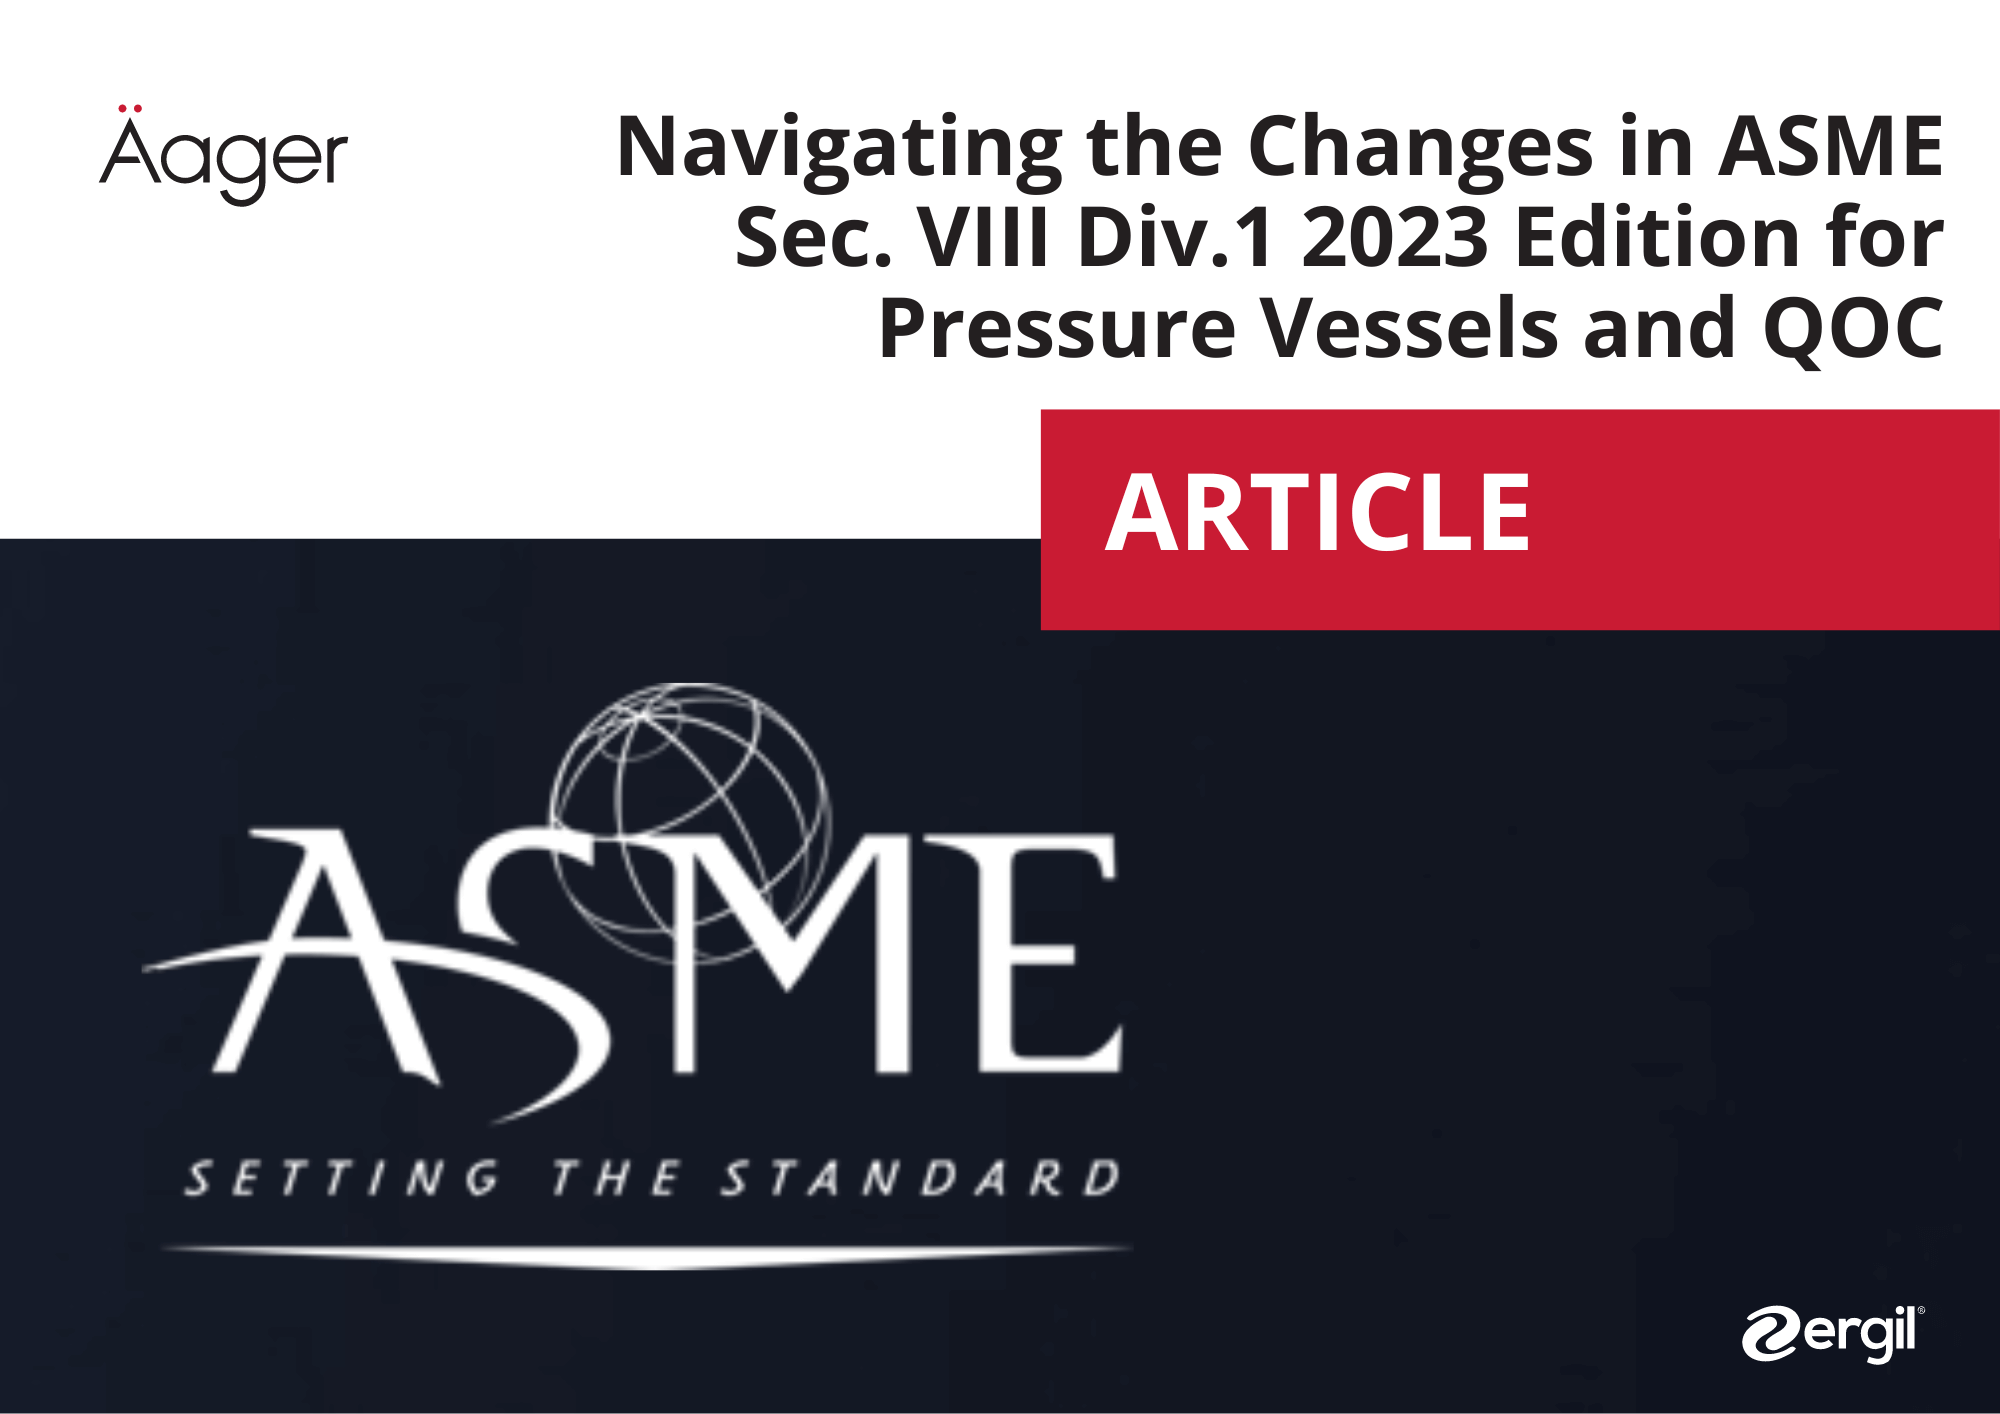 Navigating the Changes in ASME Sec. VIII Div.1 2023 Edition for Pressure Vessels and QOC 34